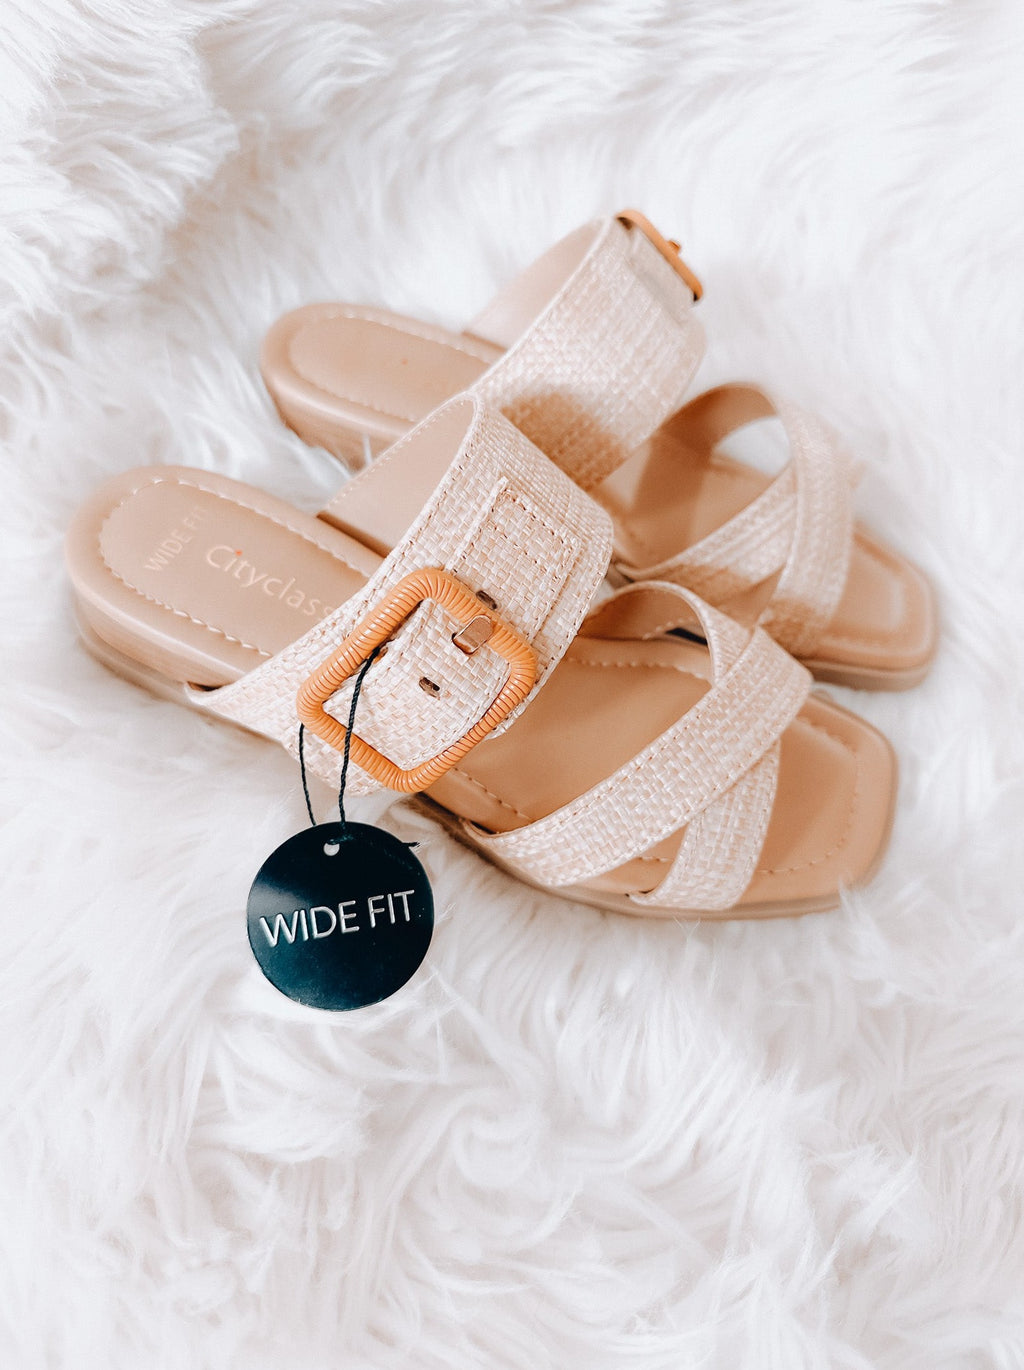 Radiant Day- Wide Fit Sandals